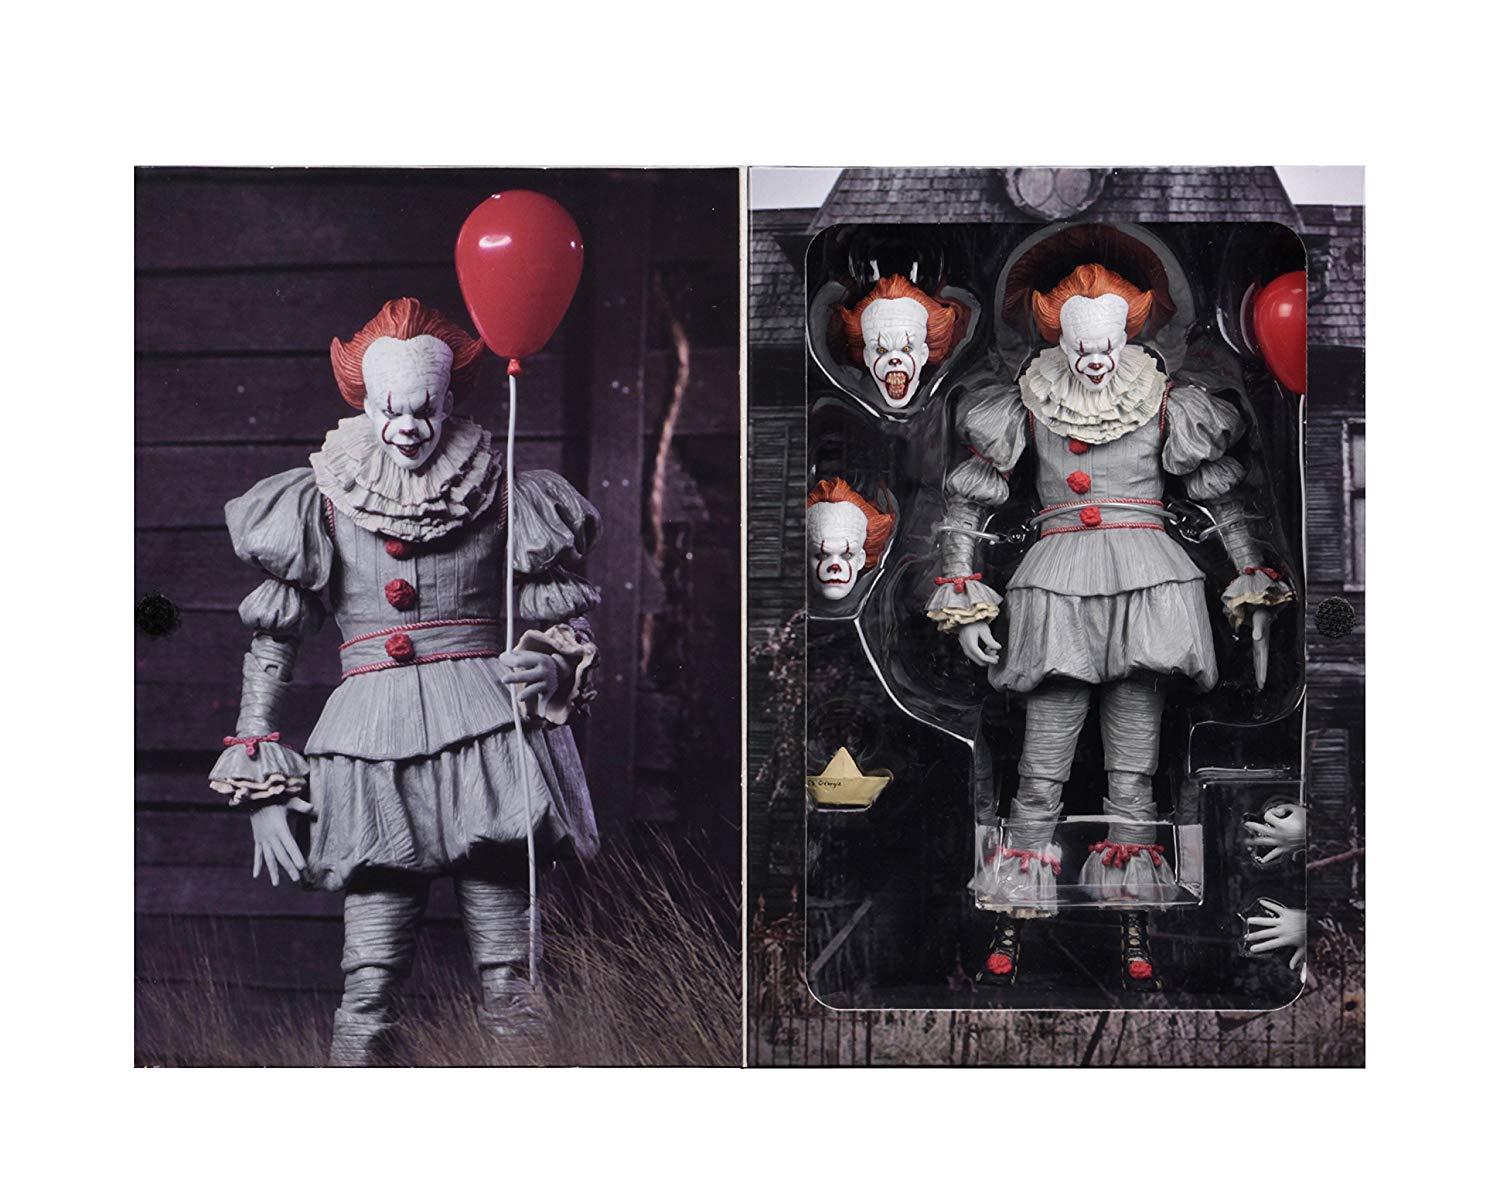 NECA - IT - 7” Scale Action Figure - Ultimate Pennywise (2017) - Nerd Arena